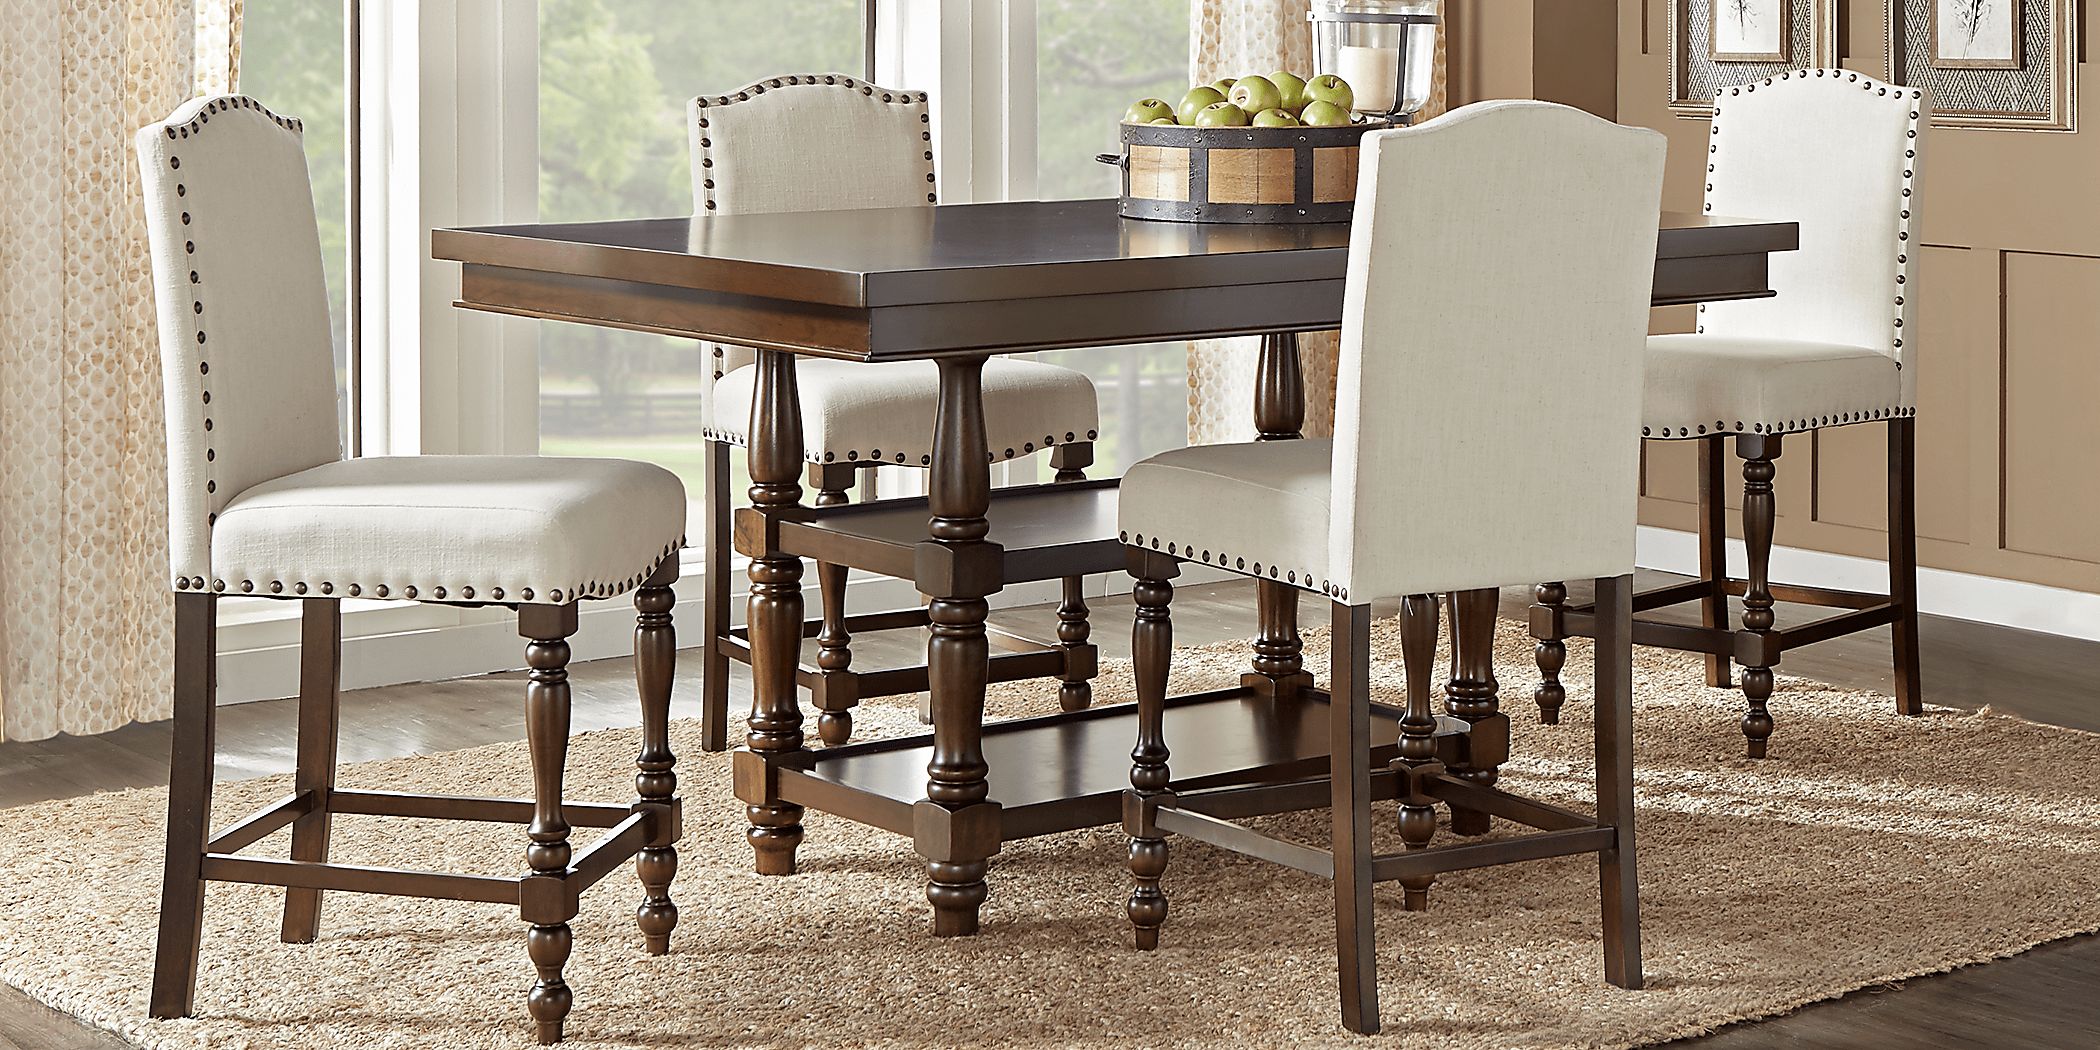 Stanton Cherry 5 Pc Counter Height Dining Room